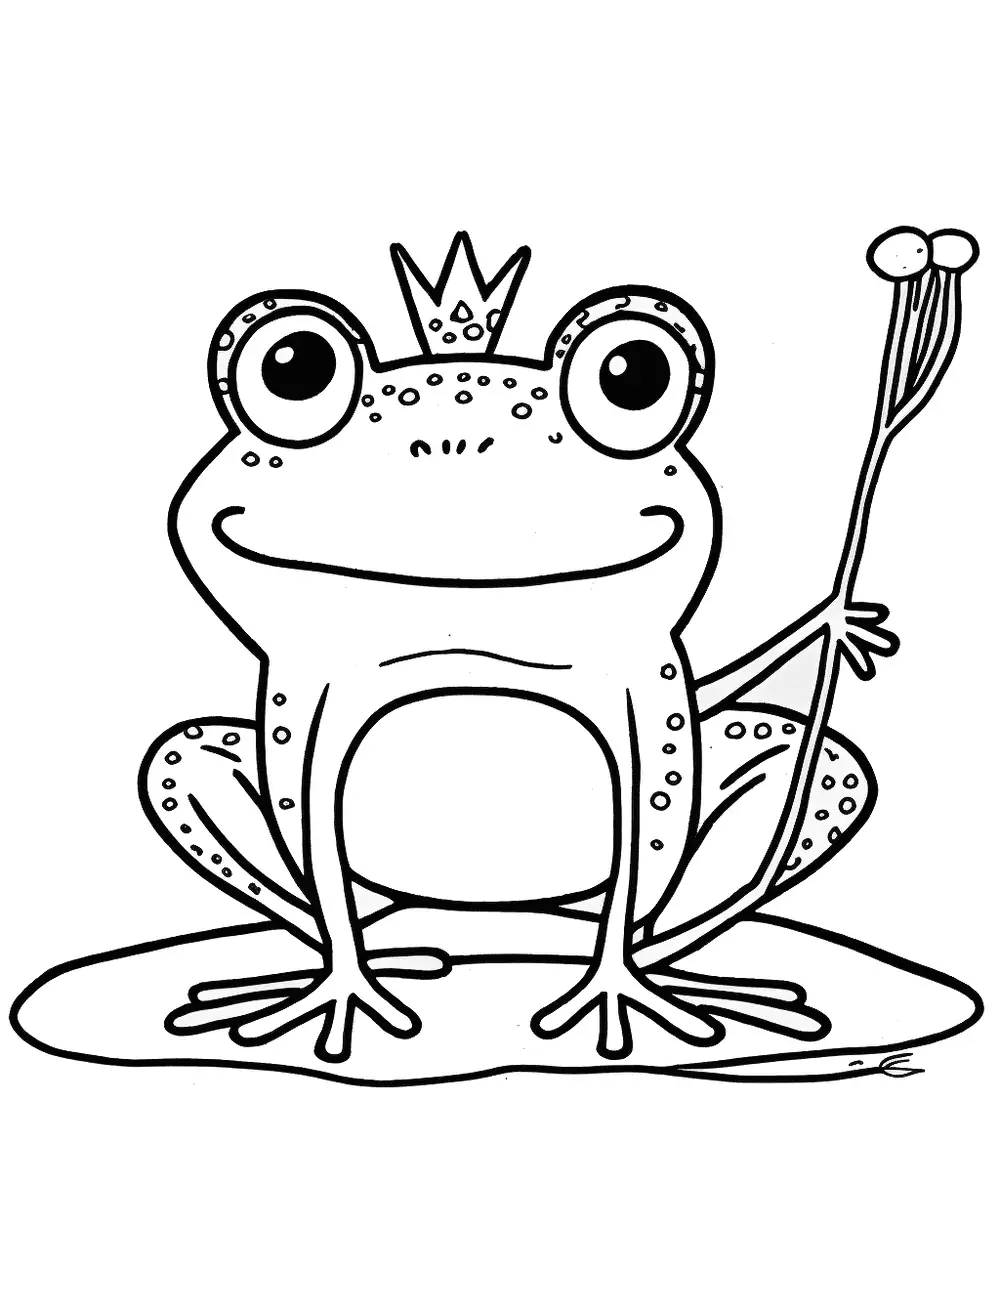 Frog Prince Coloring Page - A frog prince, with a crown and a royal scepter